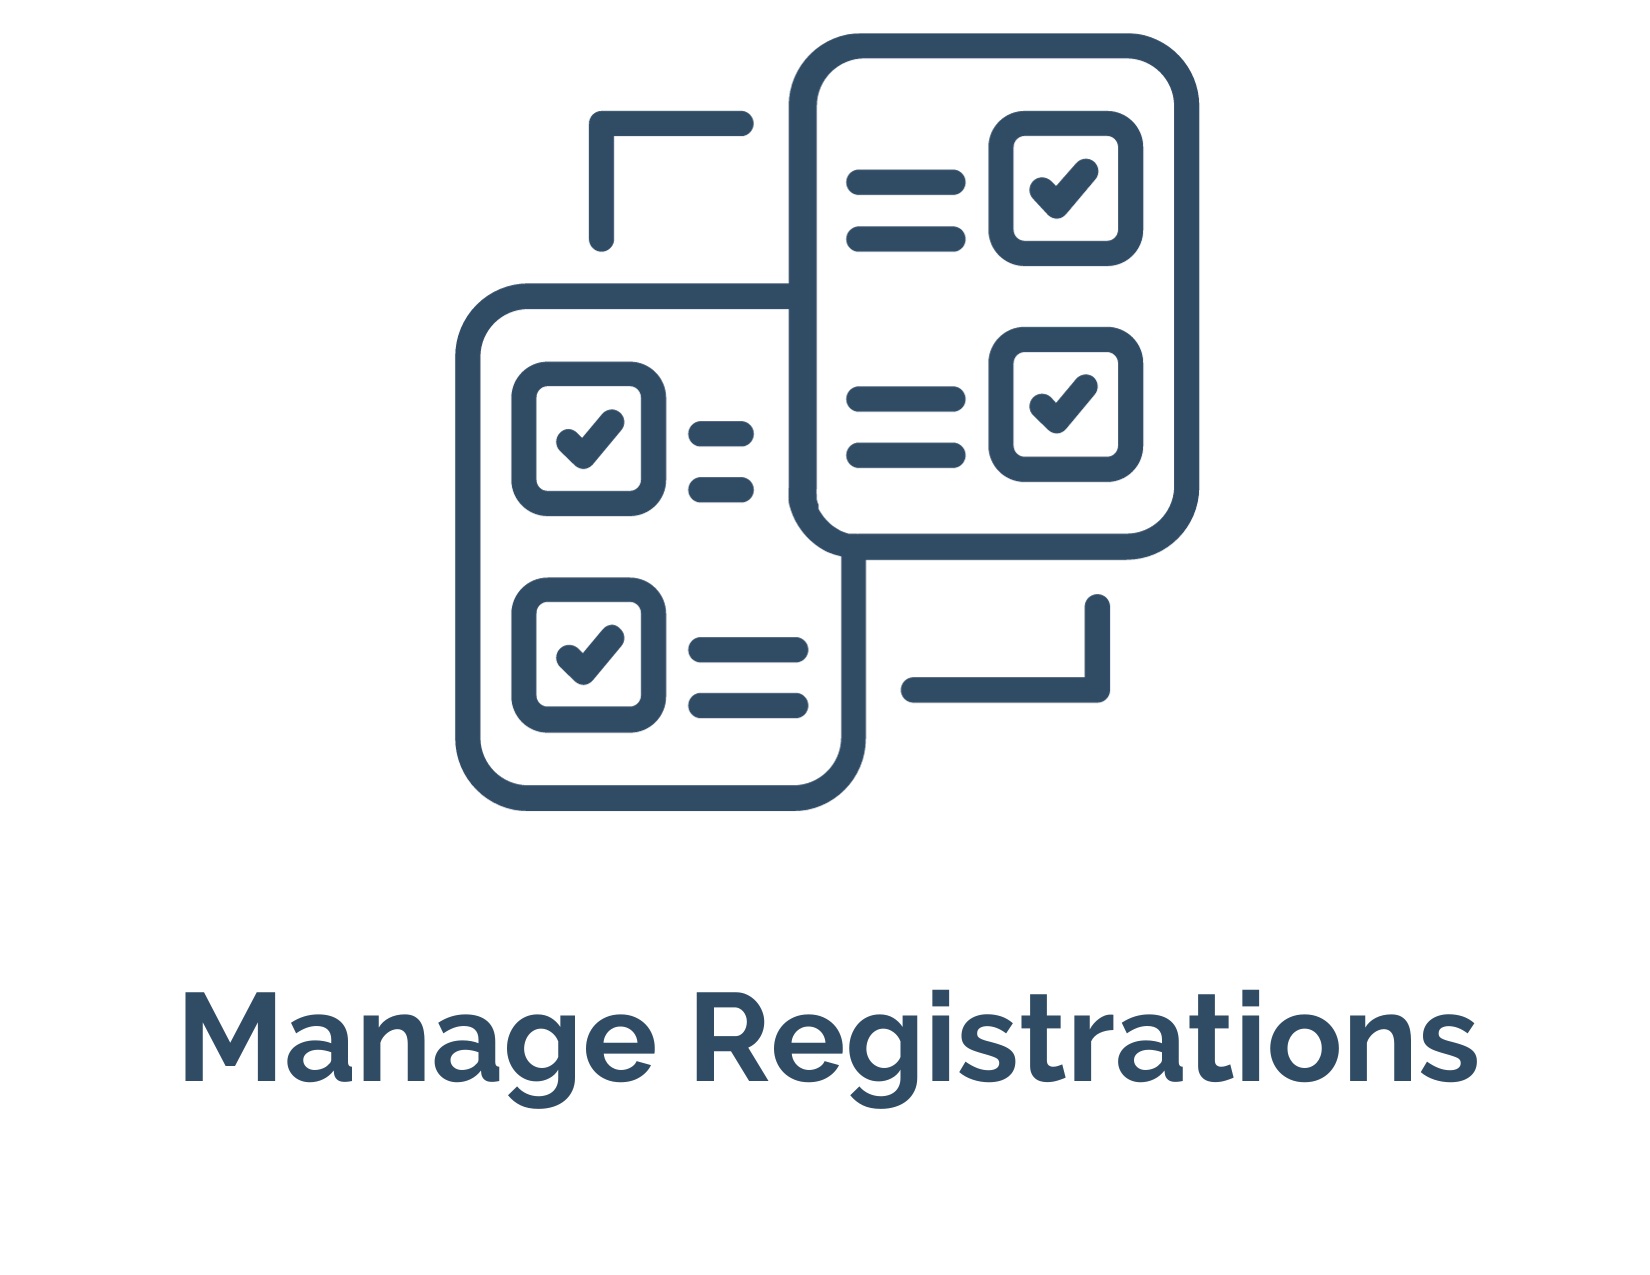 Administrator Guide Manage Registrations (1)